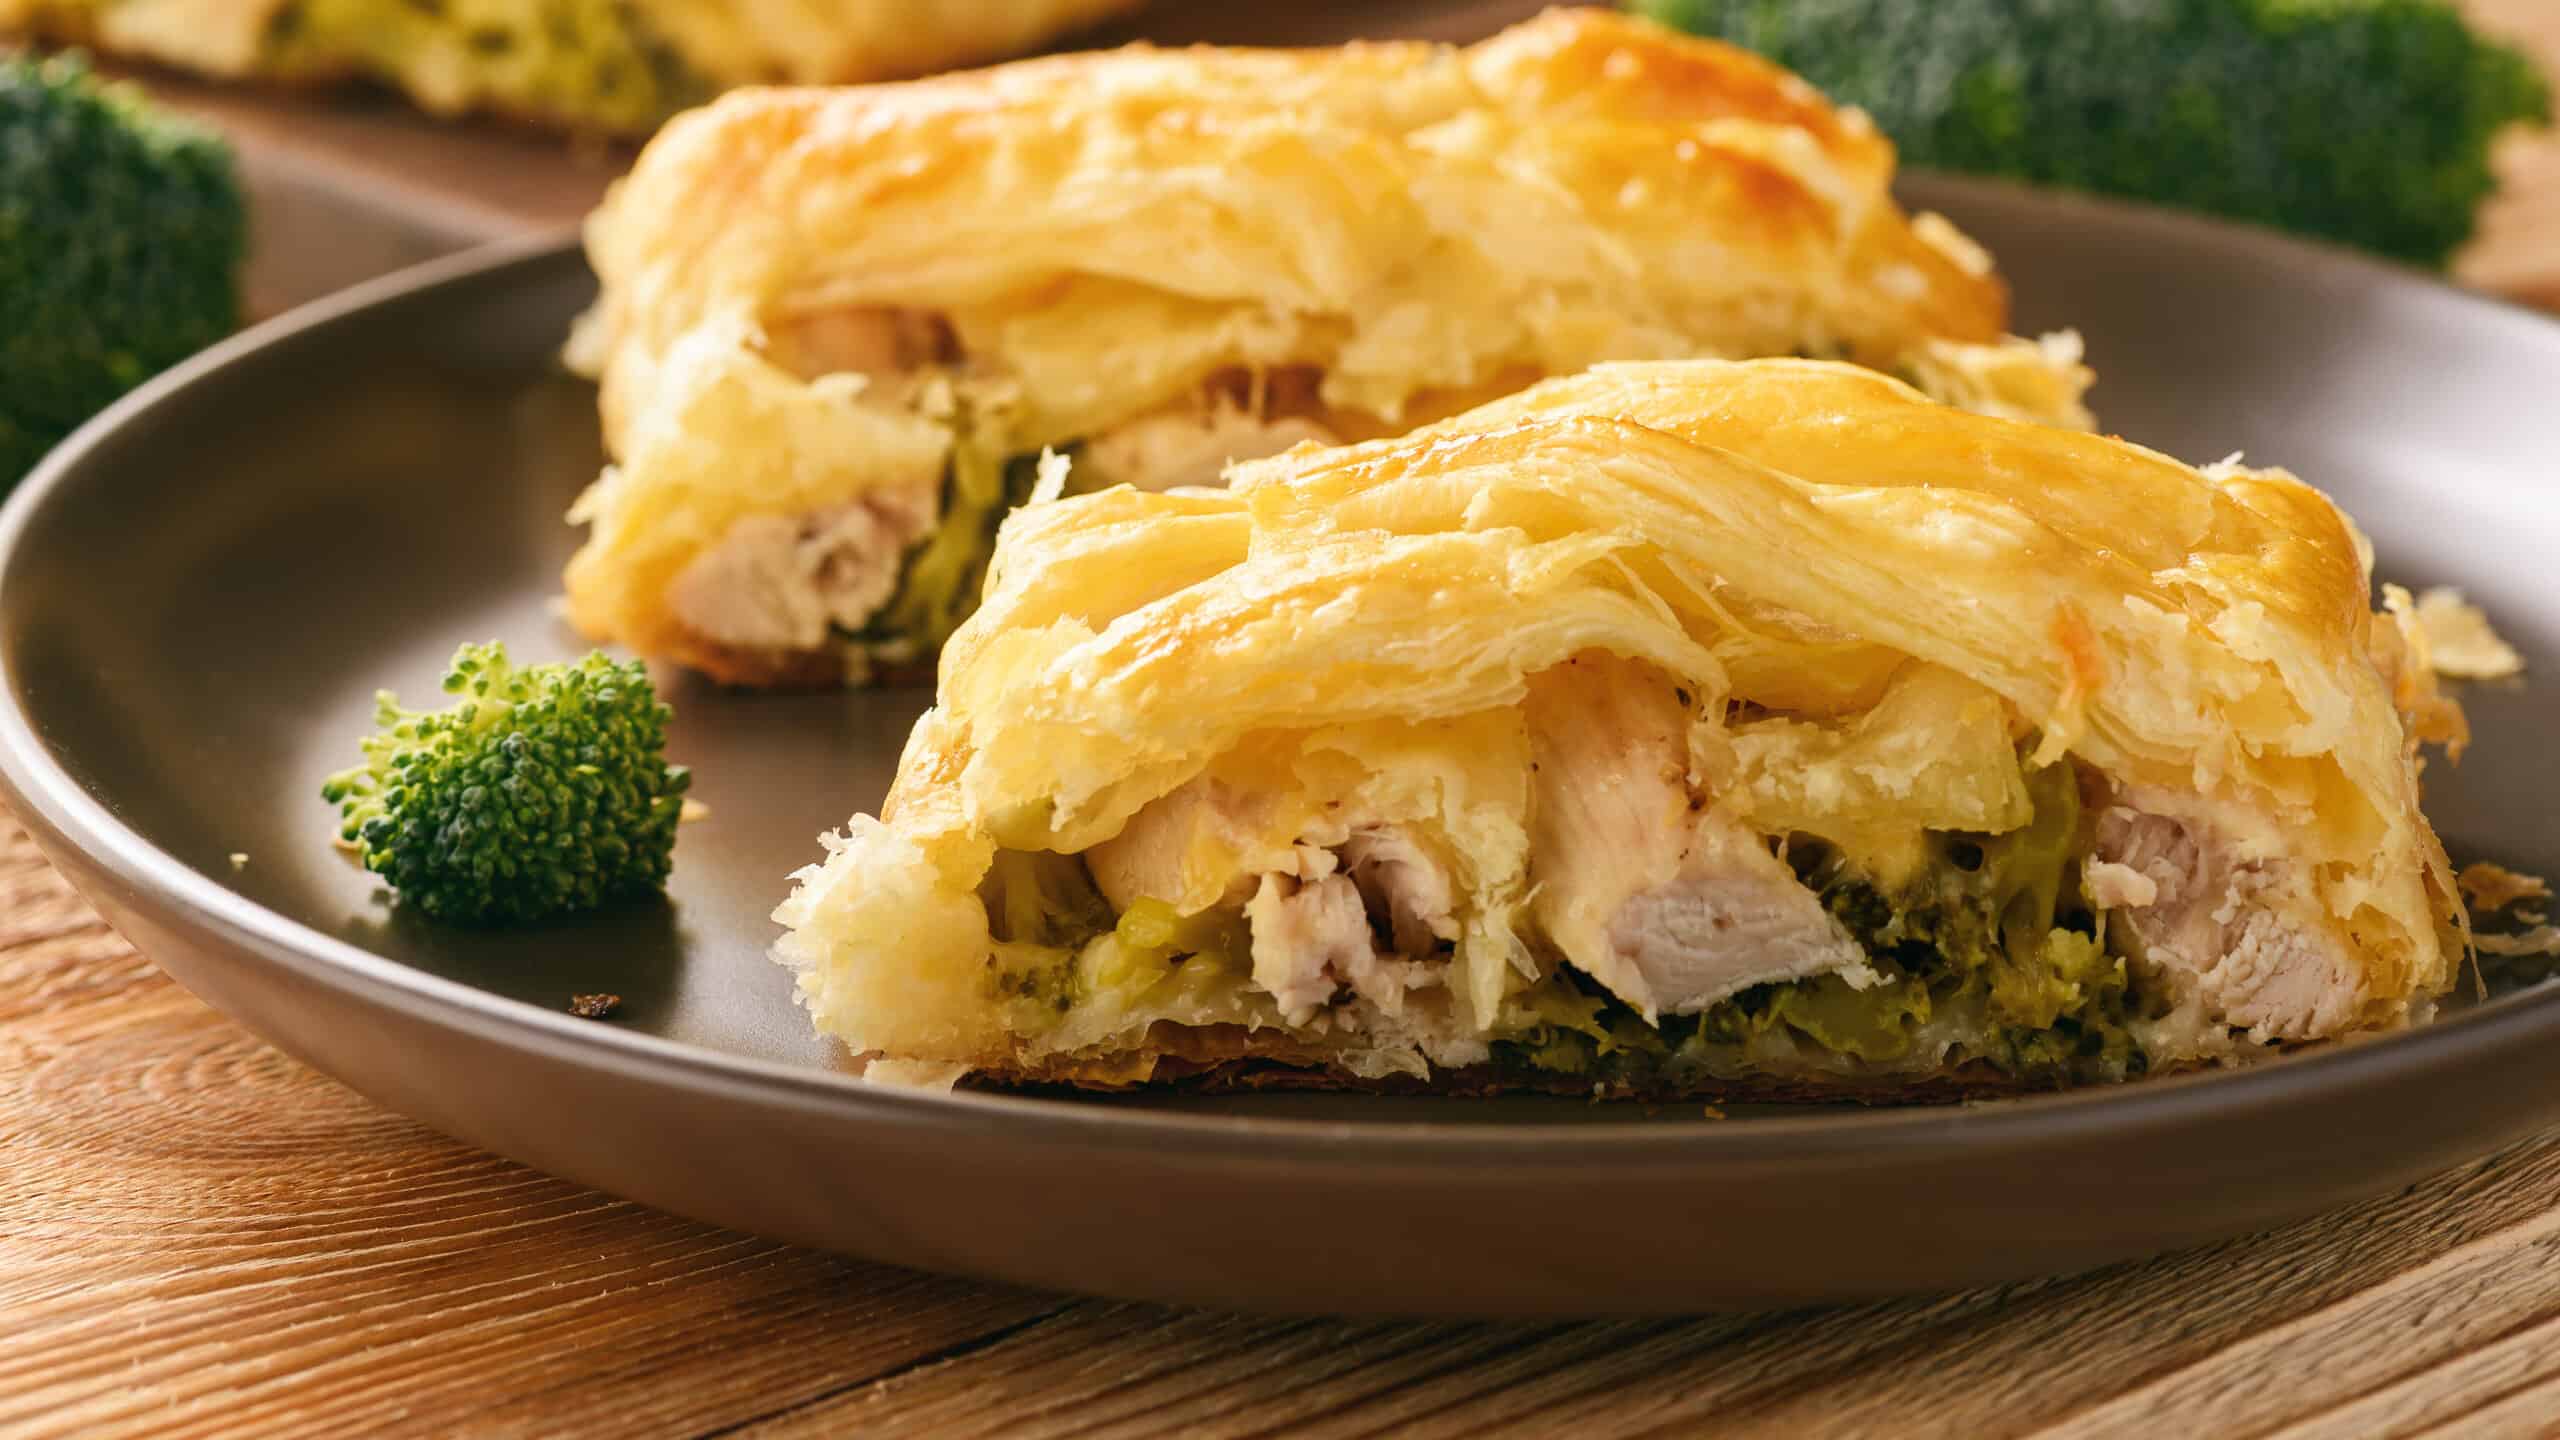 Homemade pie stuffed with broccoli, chicken and cheese.